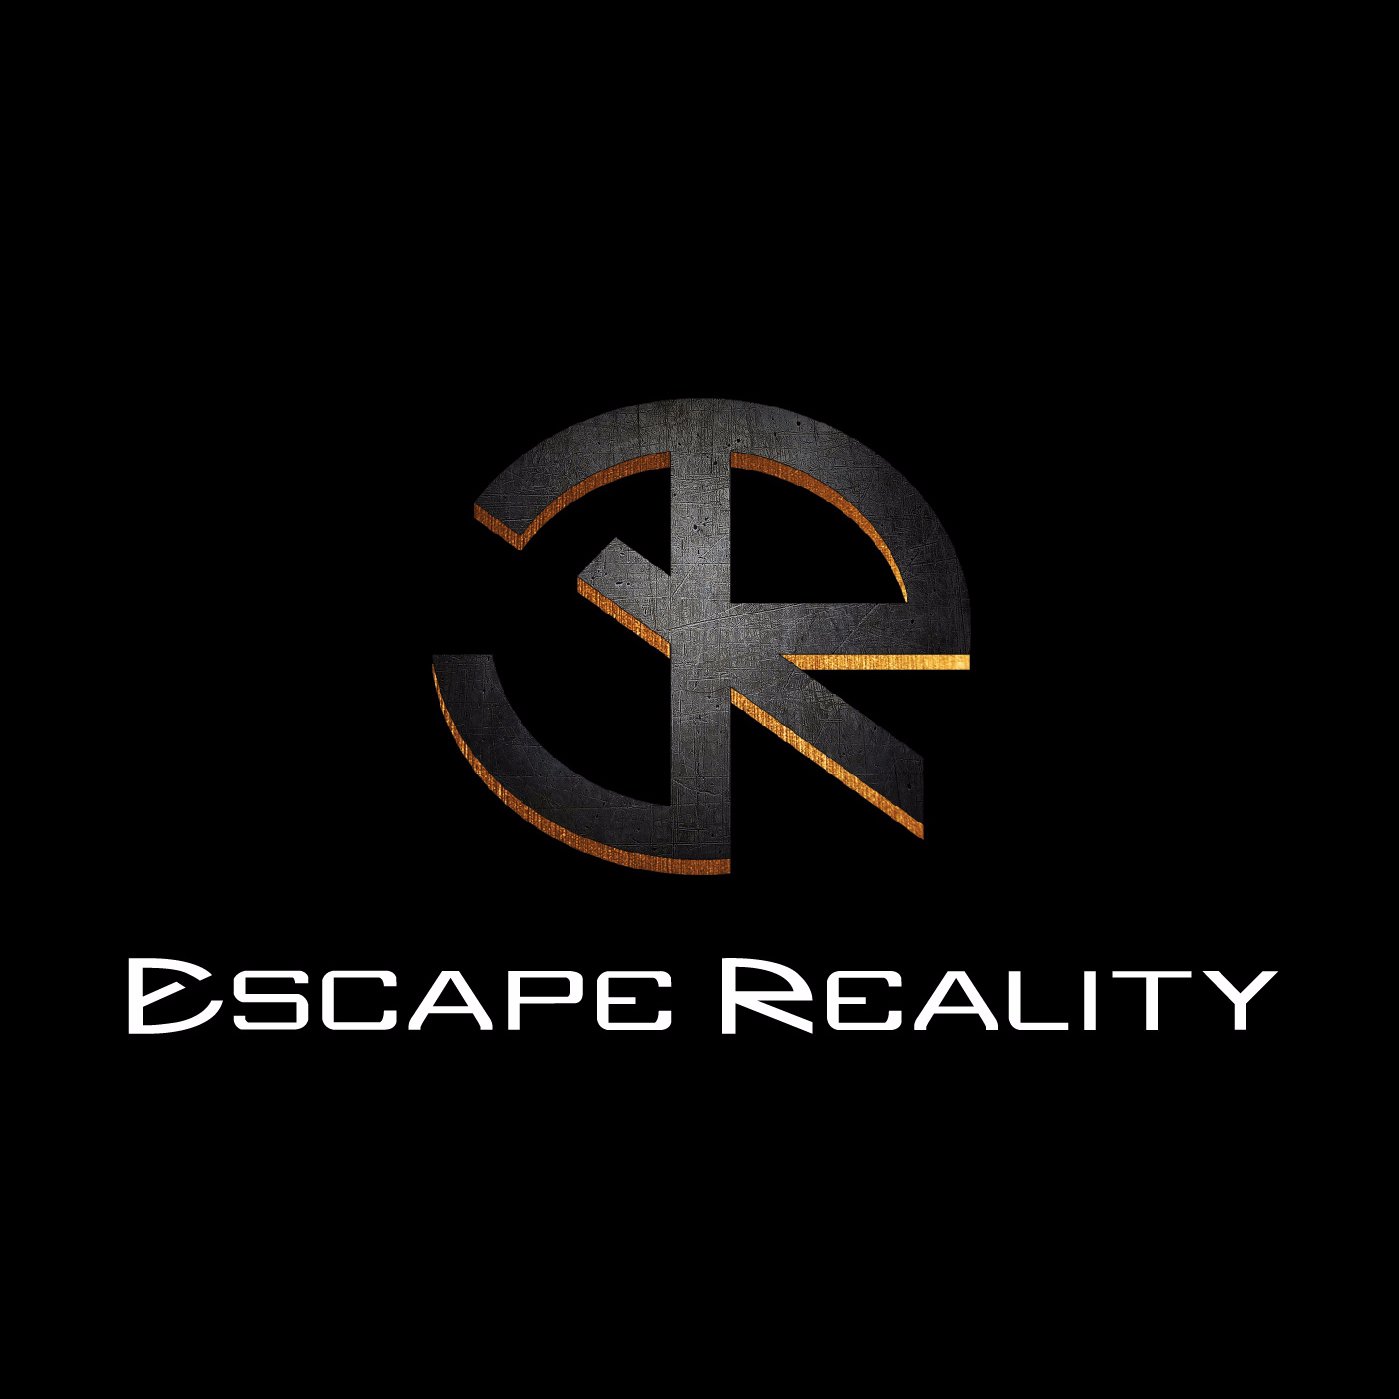 An immersive live escape game experience where players must solve a series of challenging puzzles to escape before time runs out!